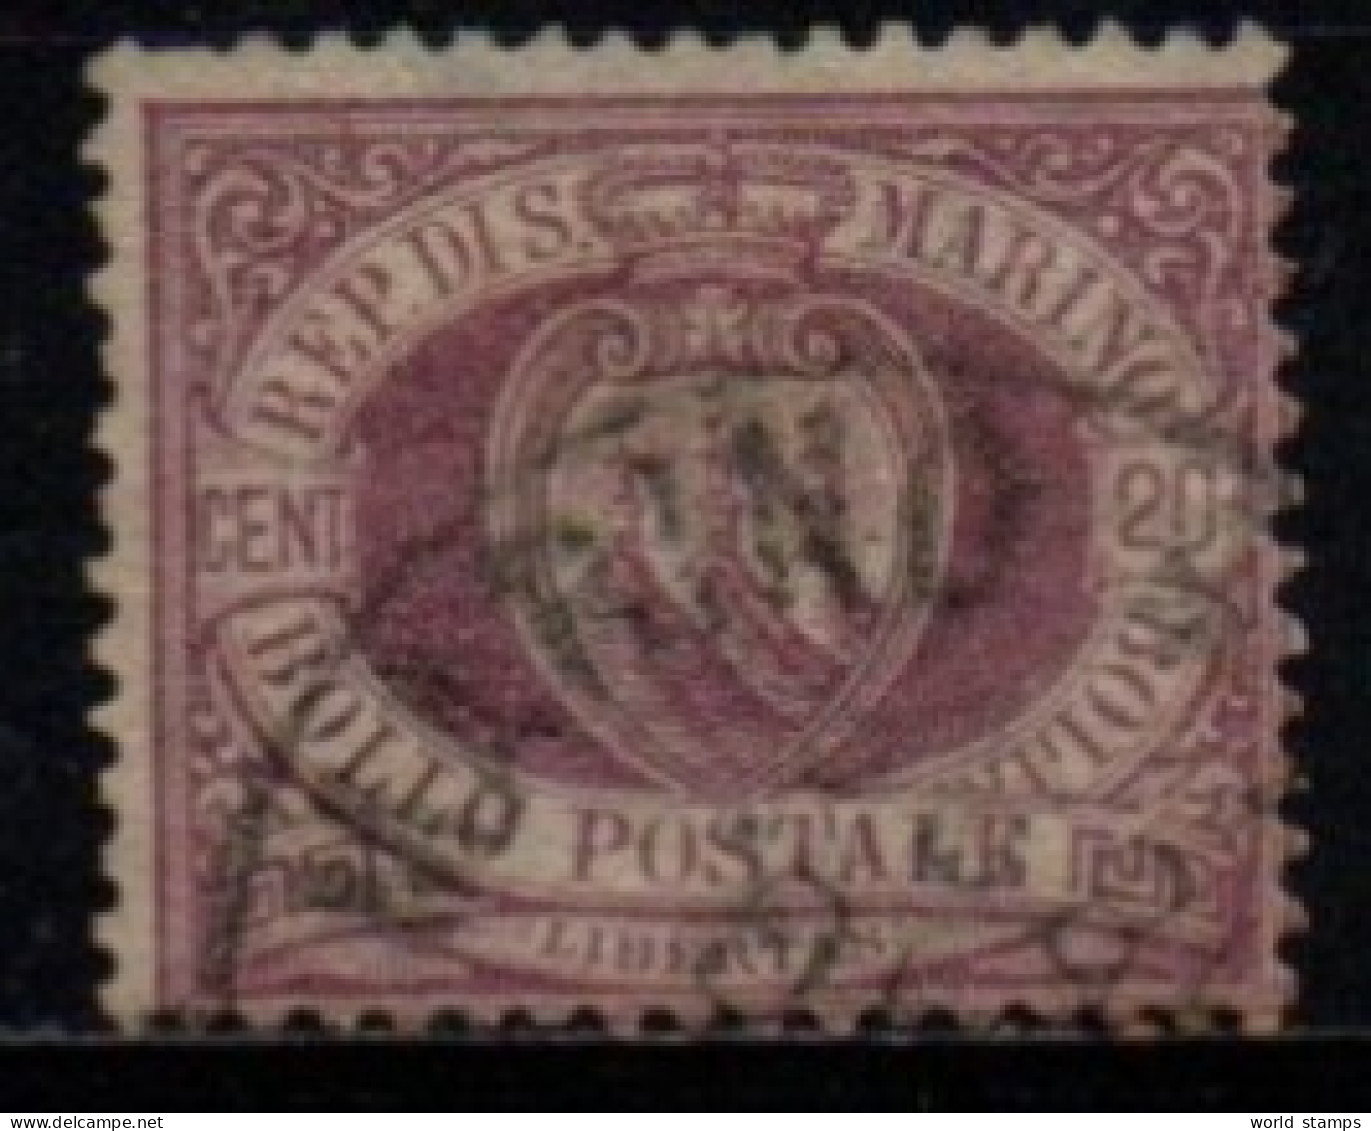 SAINT-MARIN 1895-9 O - Used Stamps